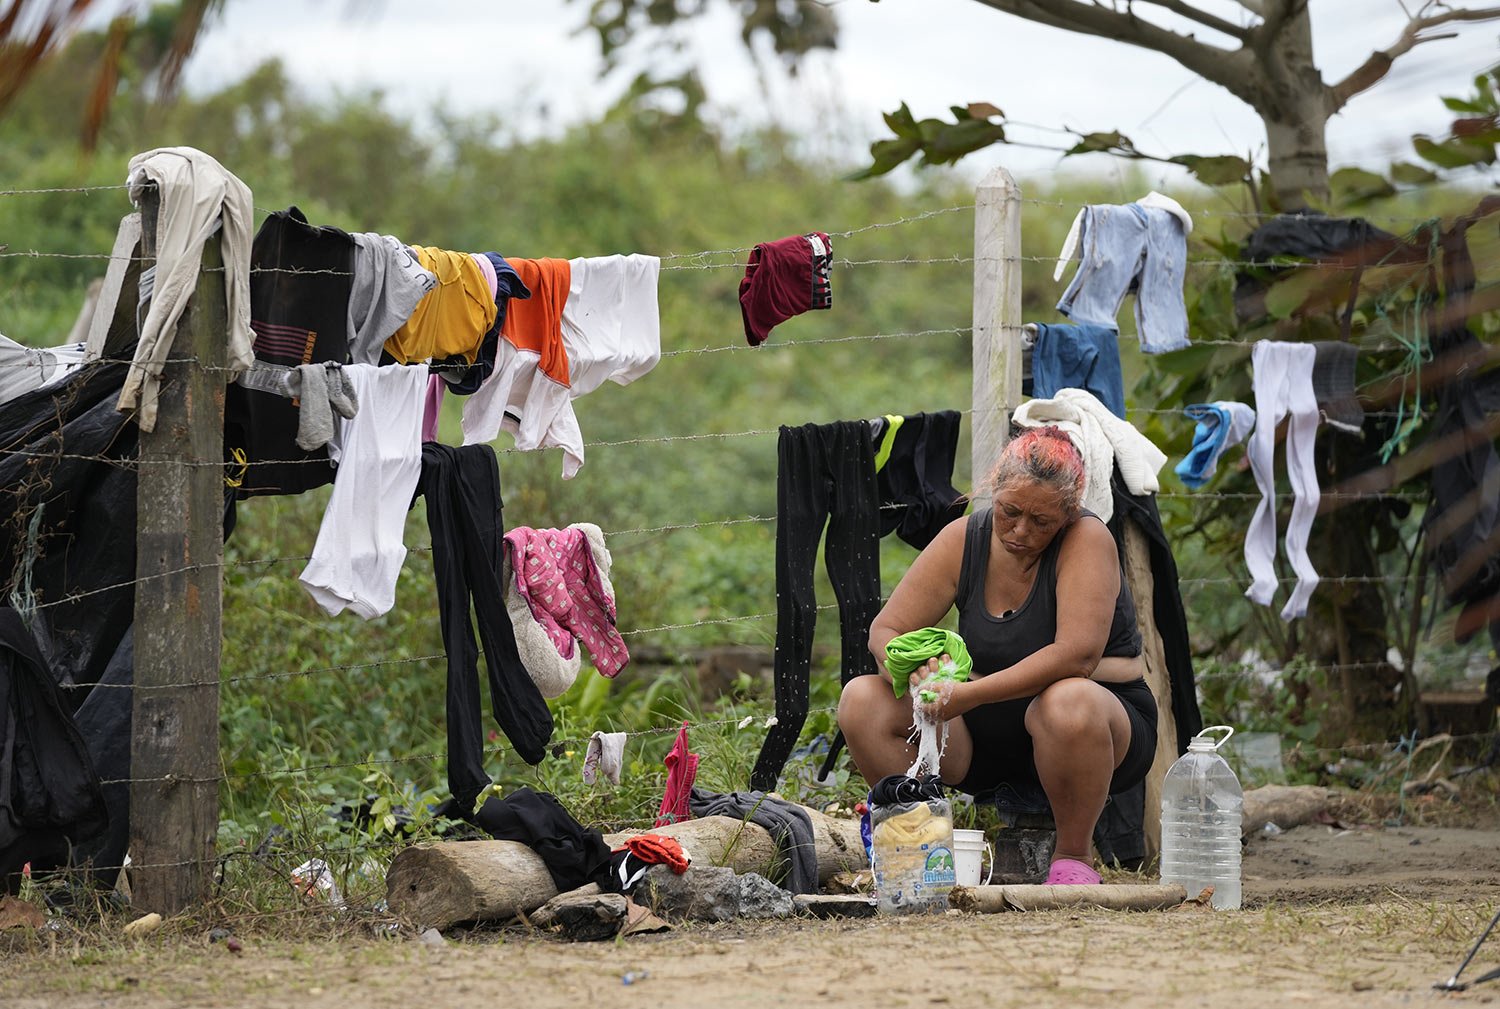  A Venezuelan migrant washes clothes in Necocli, Colombia, a stopping point for migrants taking boats to Acandi which leads to the Darien Gap, Oct. 13, 2022. (AP Photo/Fernando Vergara) 